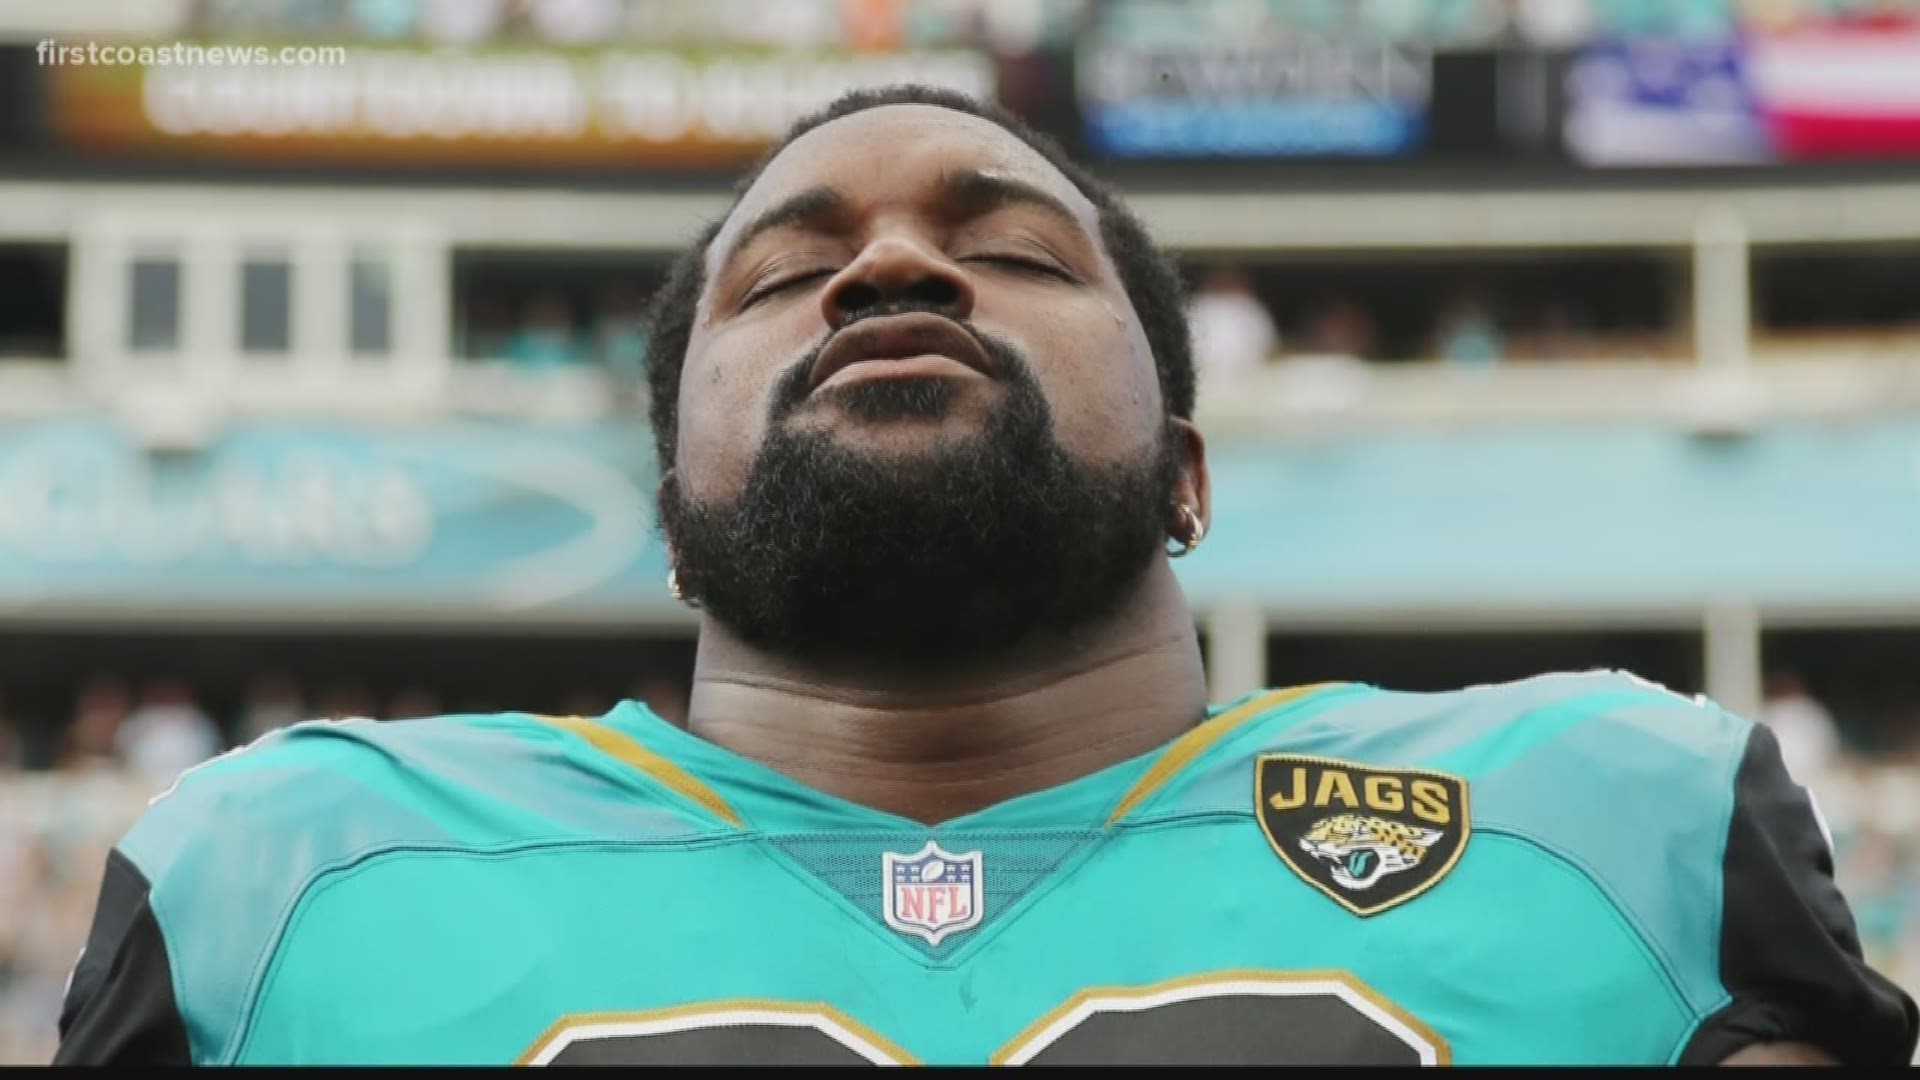 A woman has accused Jacksonville Jaguars defensive tackle Marcell Dareus of assault, according to a civil lawsuit filed July 6.